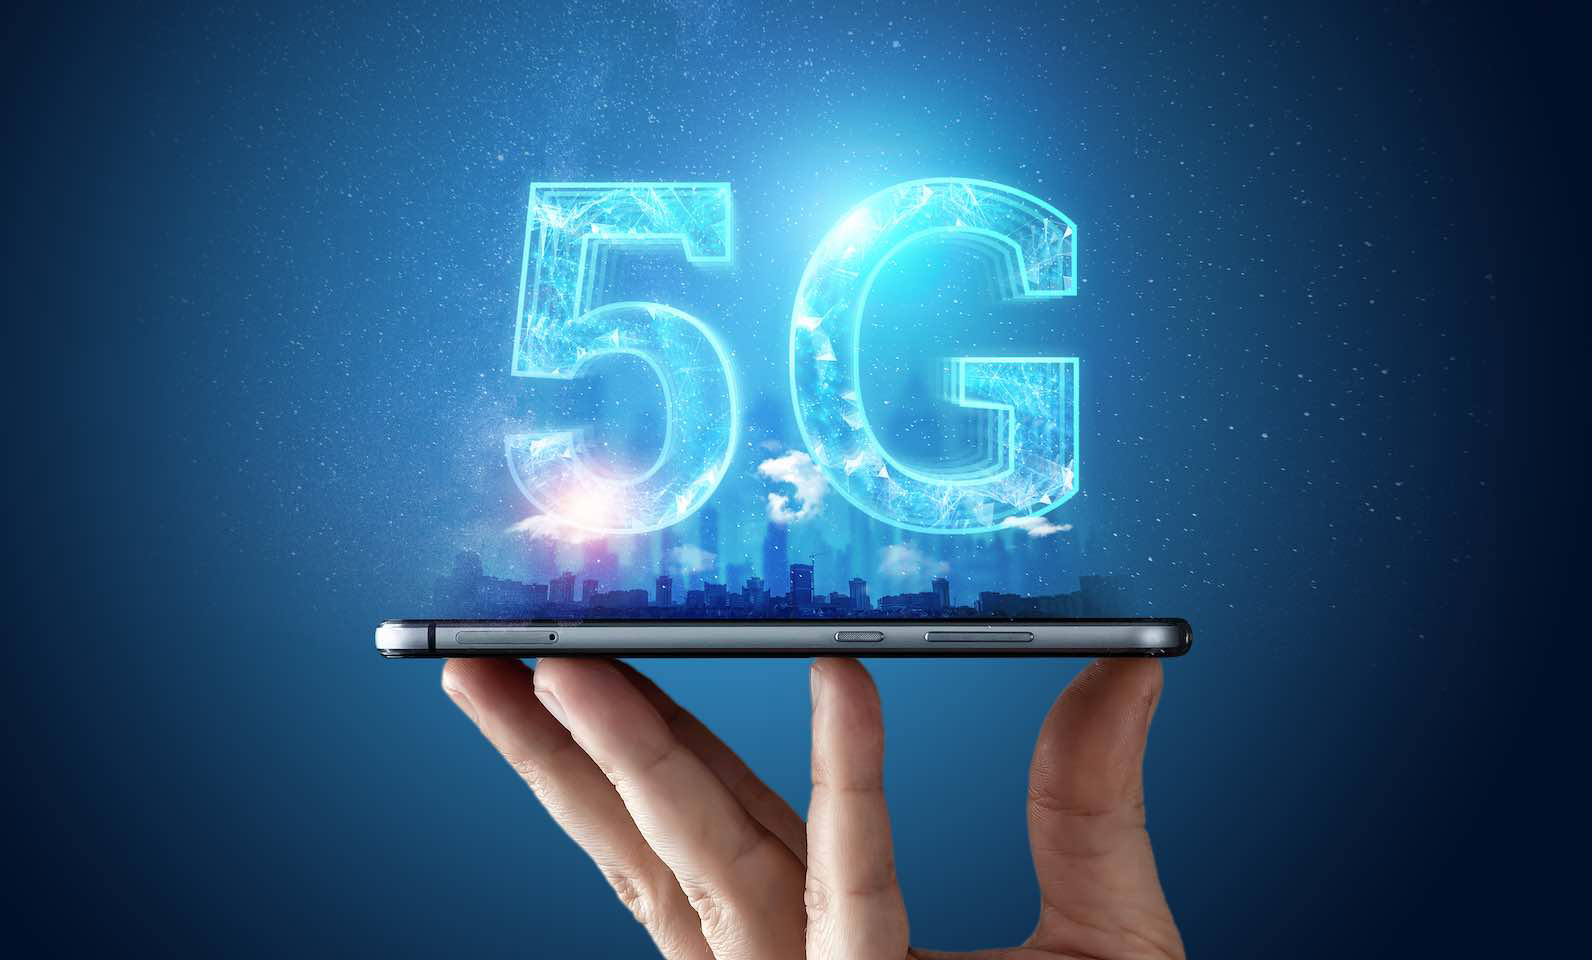 Samsung is leading the 5G smartphone market with a 74% share